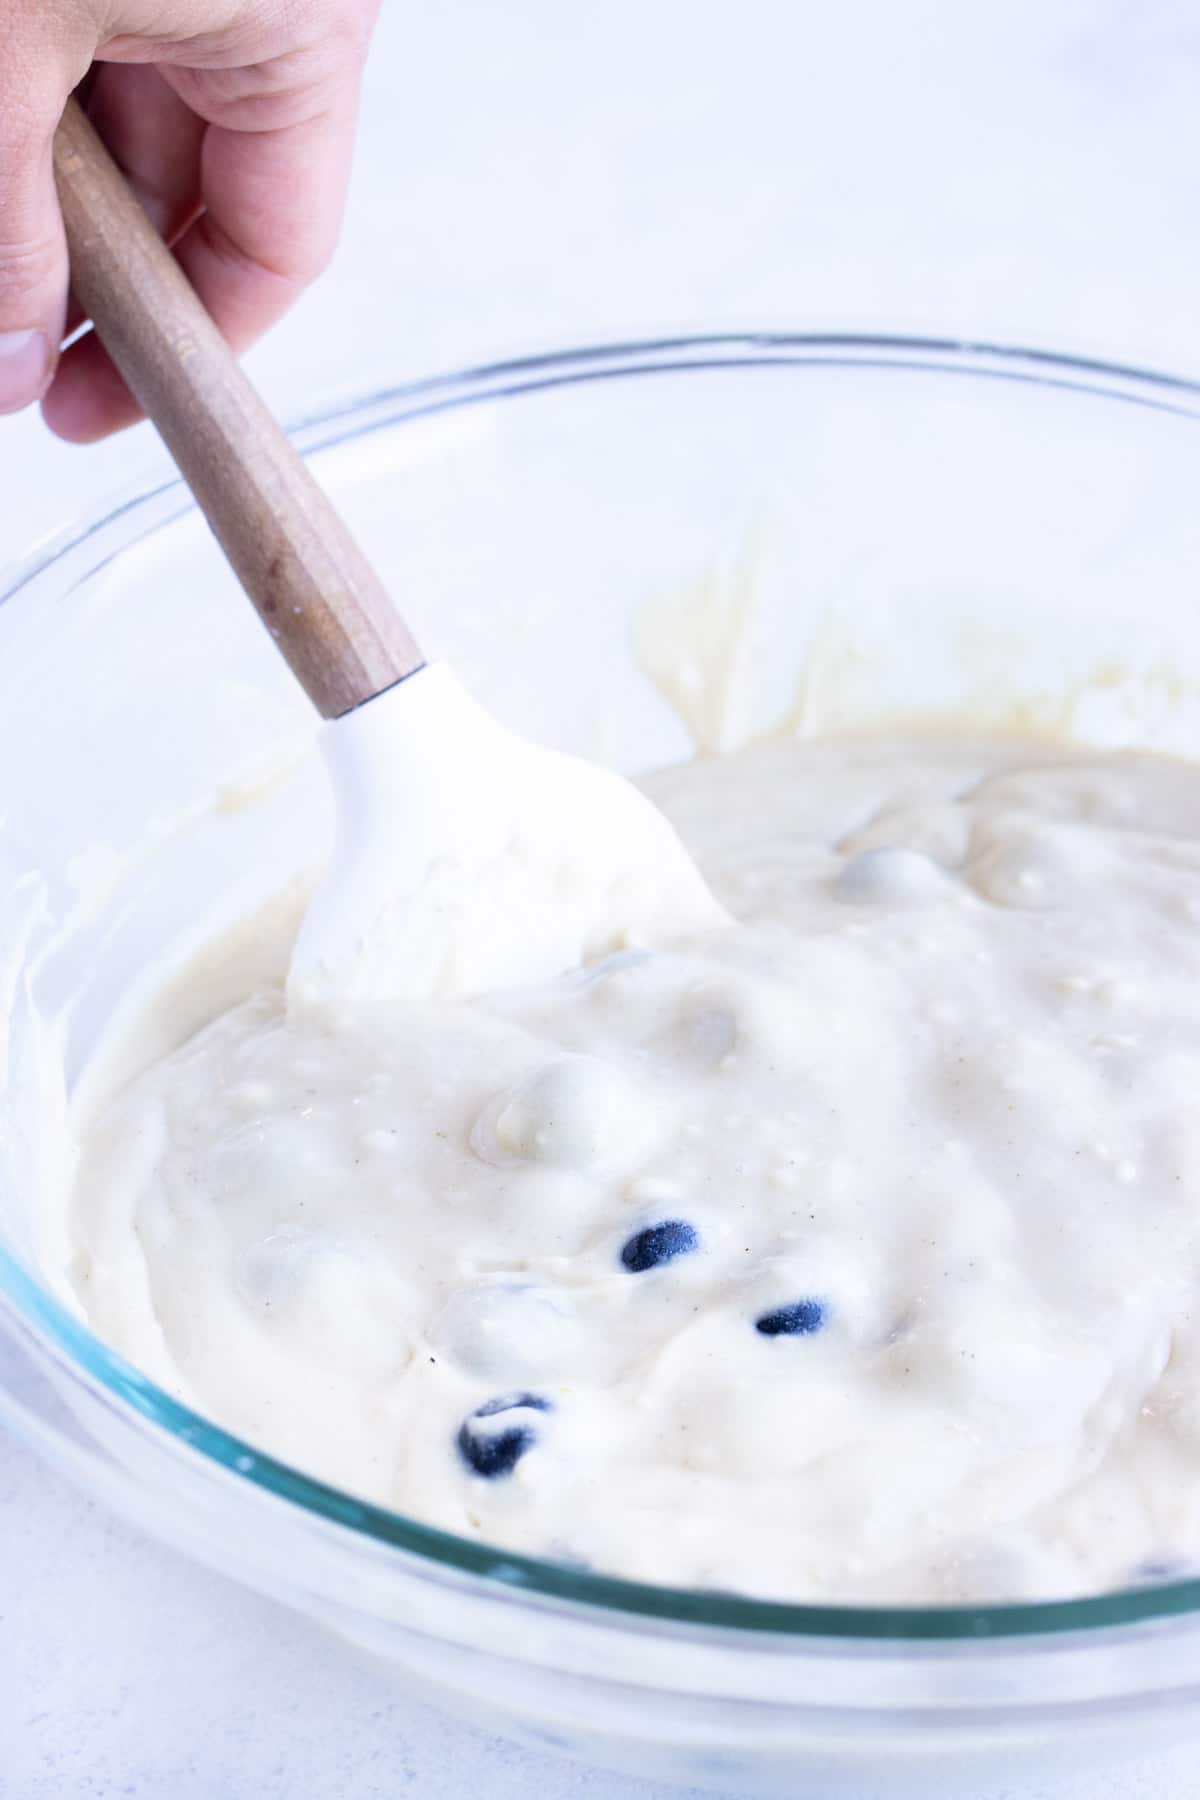 Blueberries are folded into the pancake batter.